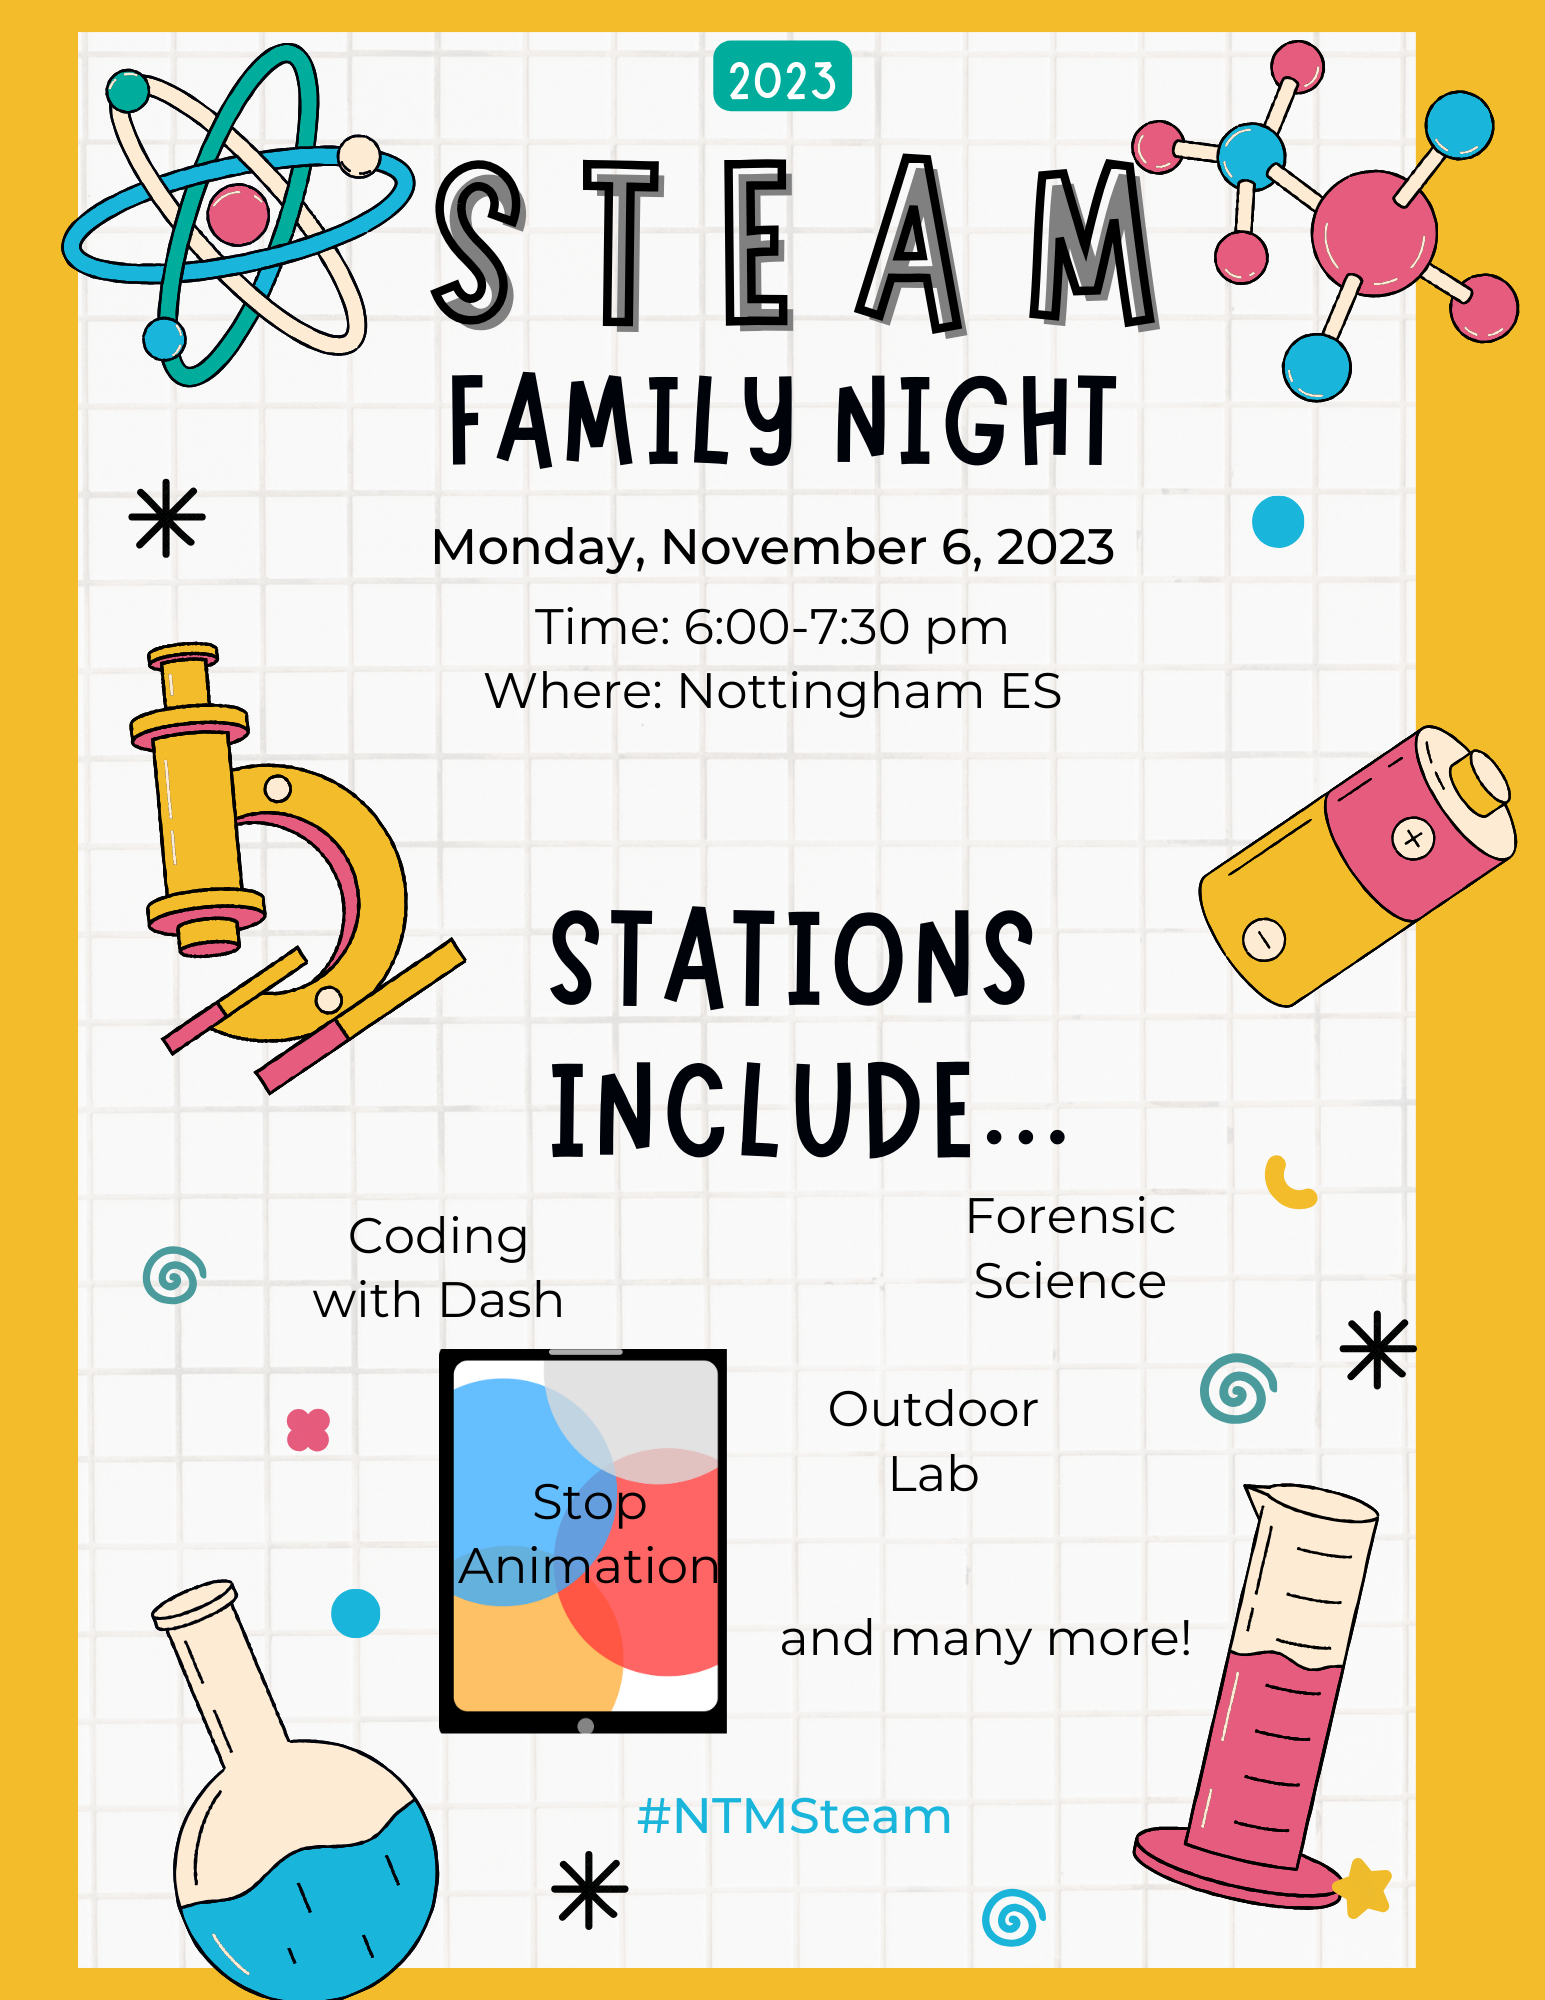 STEAM Family night. Monday November 6 from 6:00 pm to 7:30 pm at Nottingham Elementary School. Stations include stop motion, coding, out door lab and more.